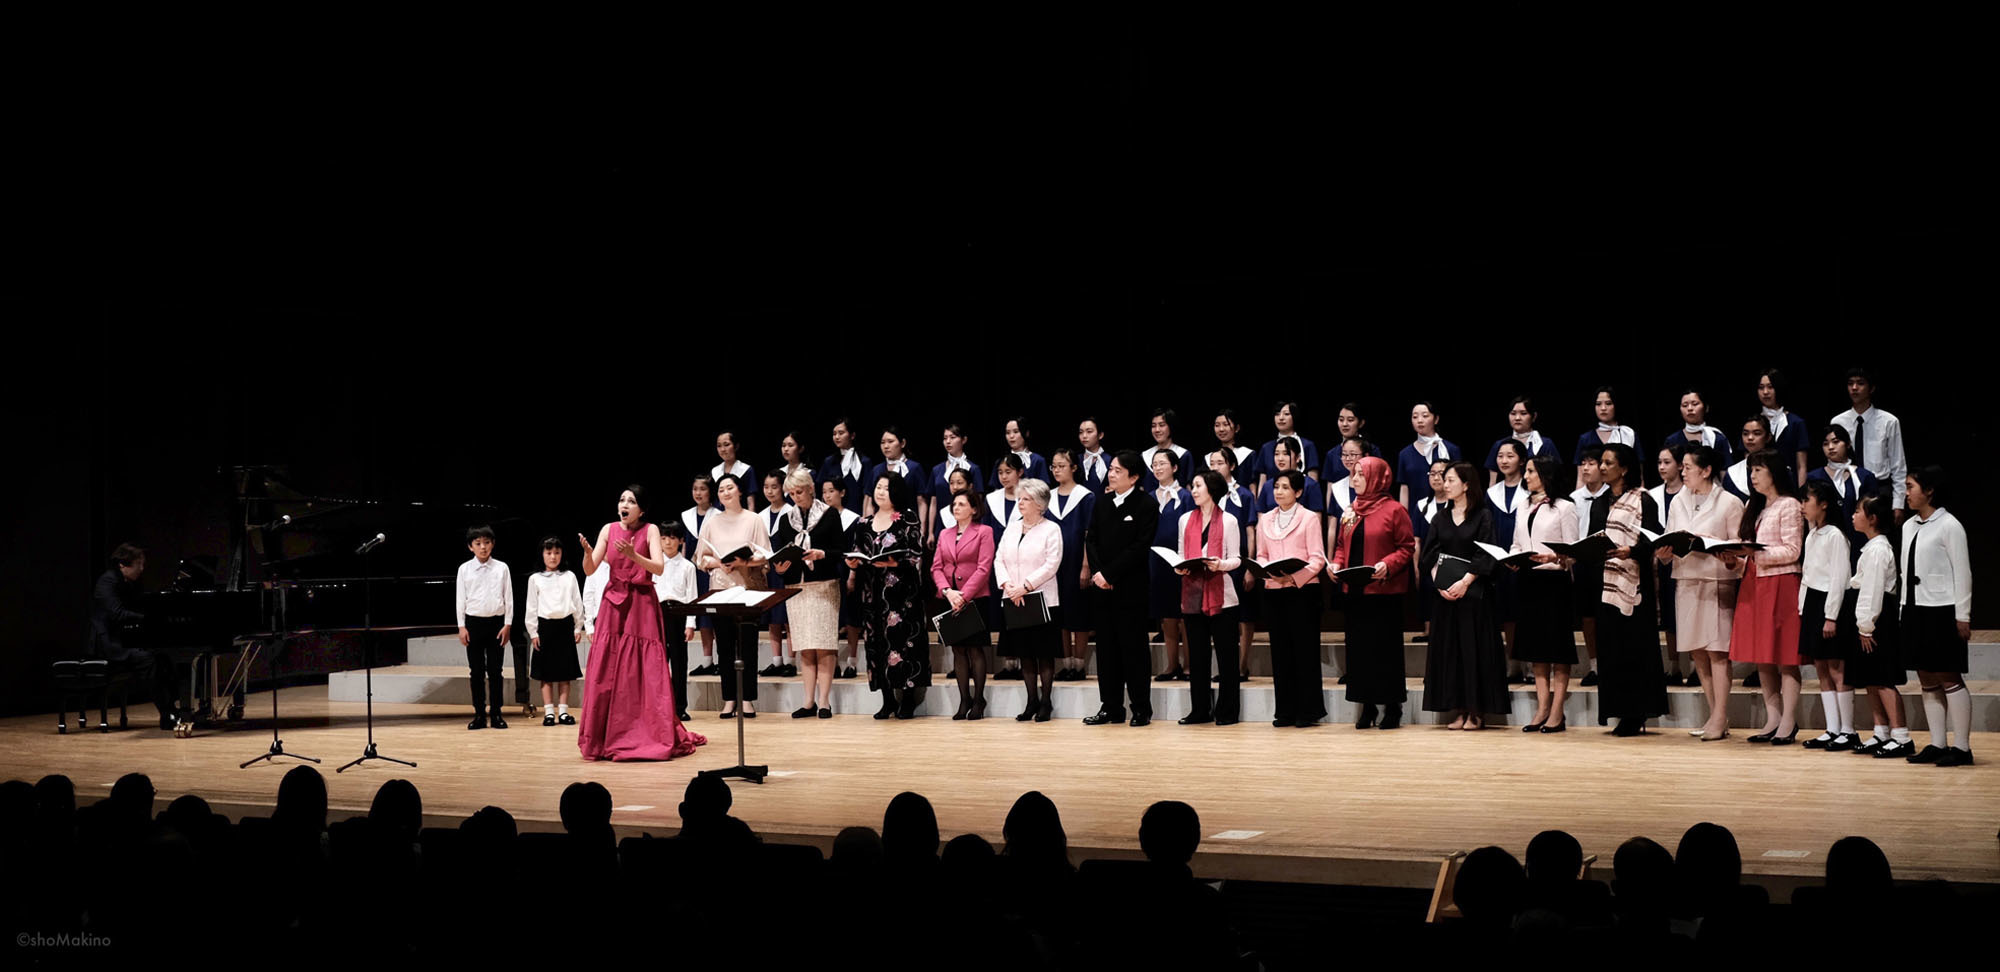 On April 13, a choir of 11 ambassadors to Japan performed at Owada Sakura Hall with a children's choir in a concert titled 